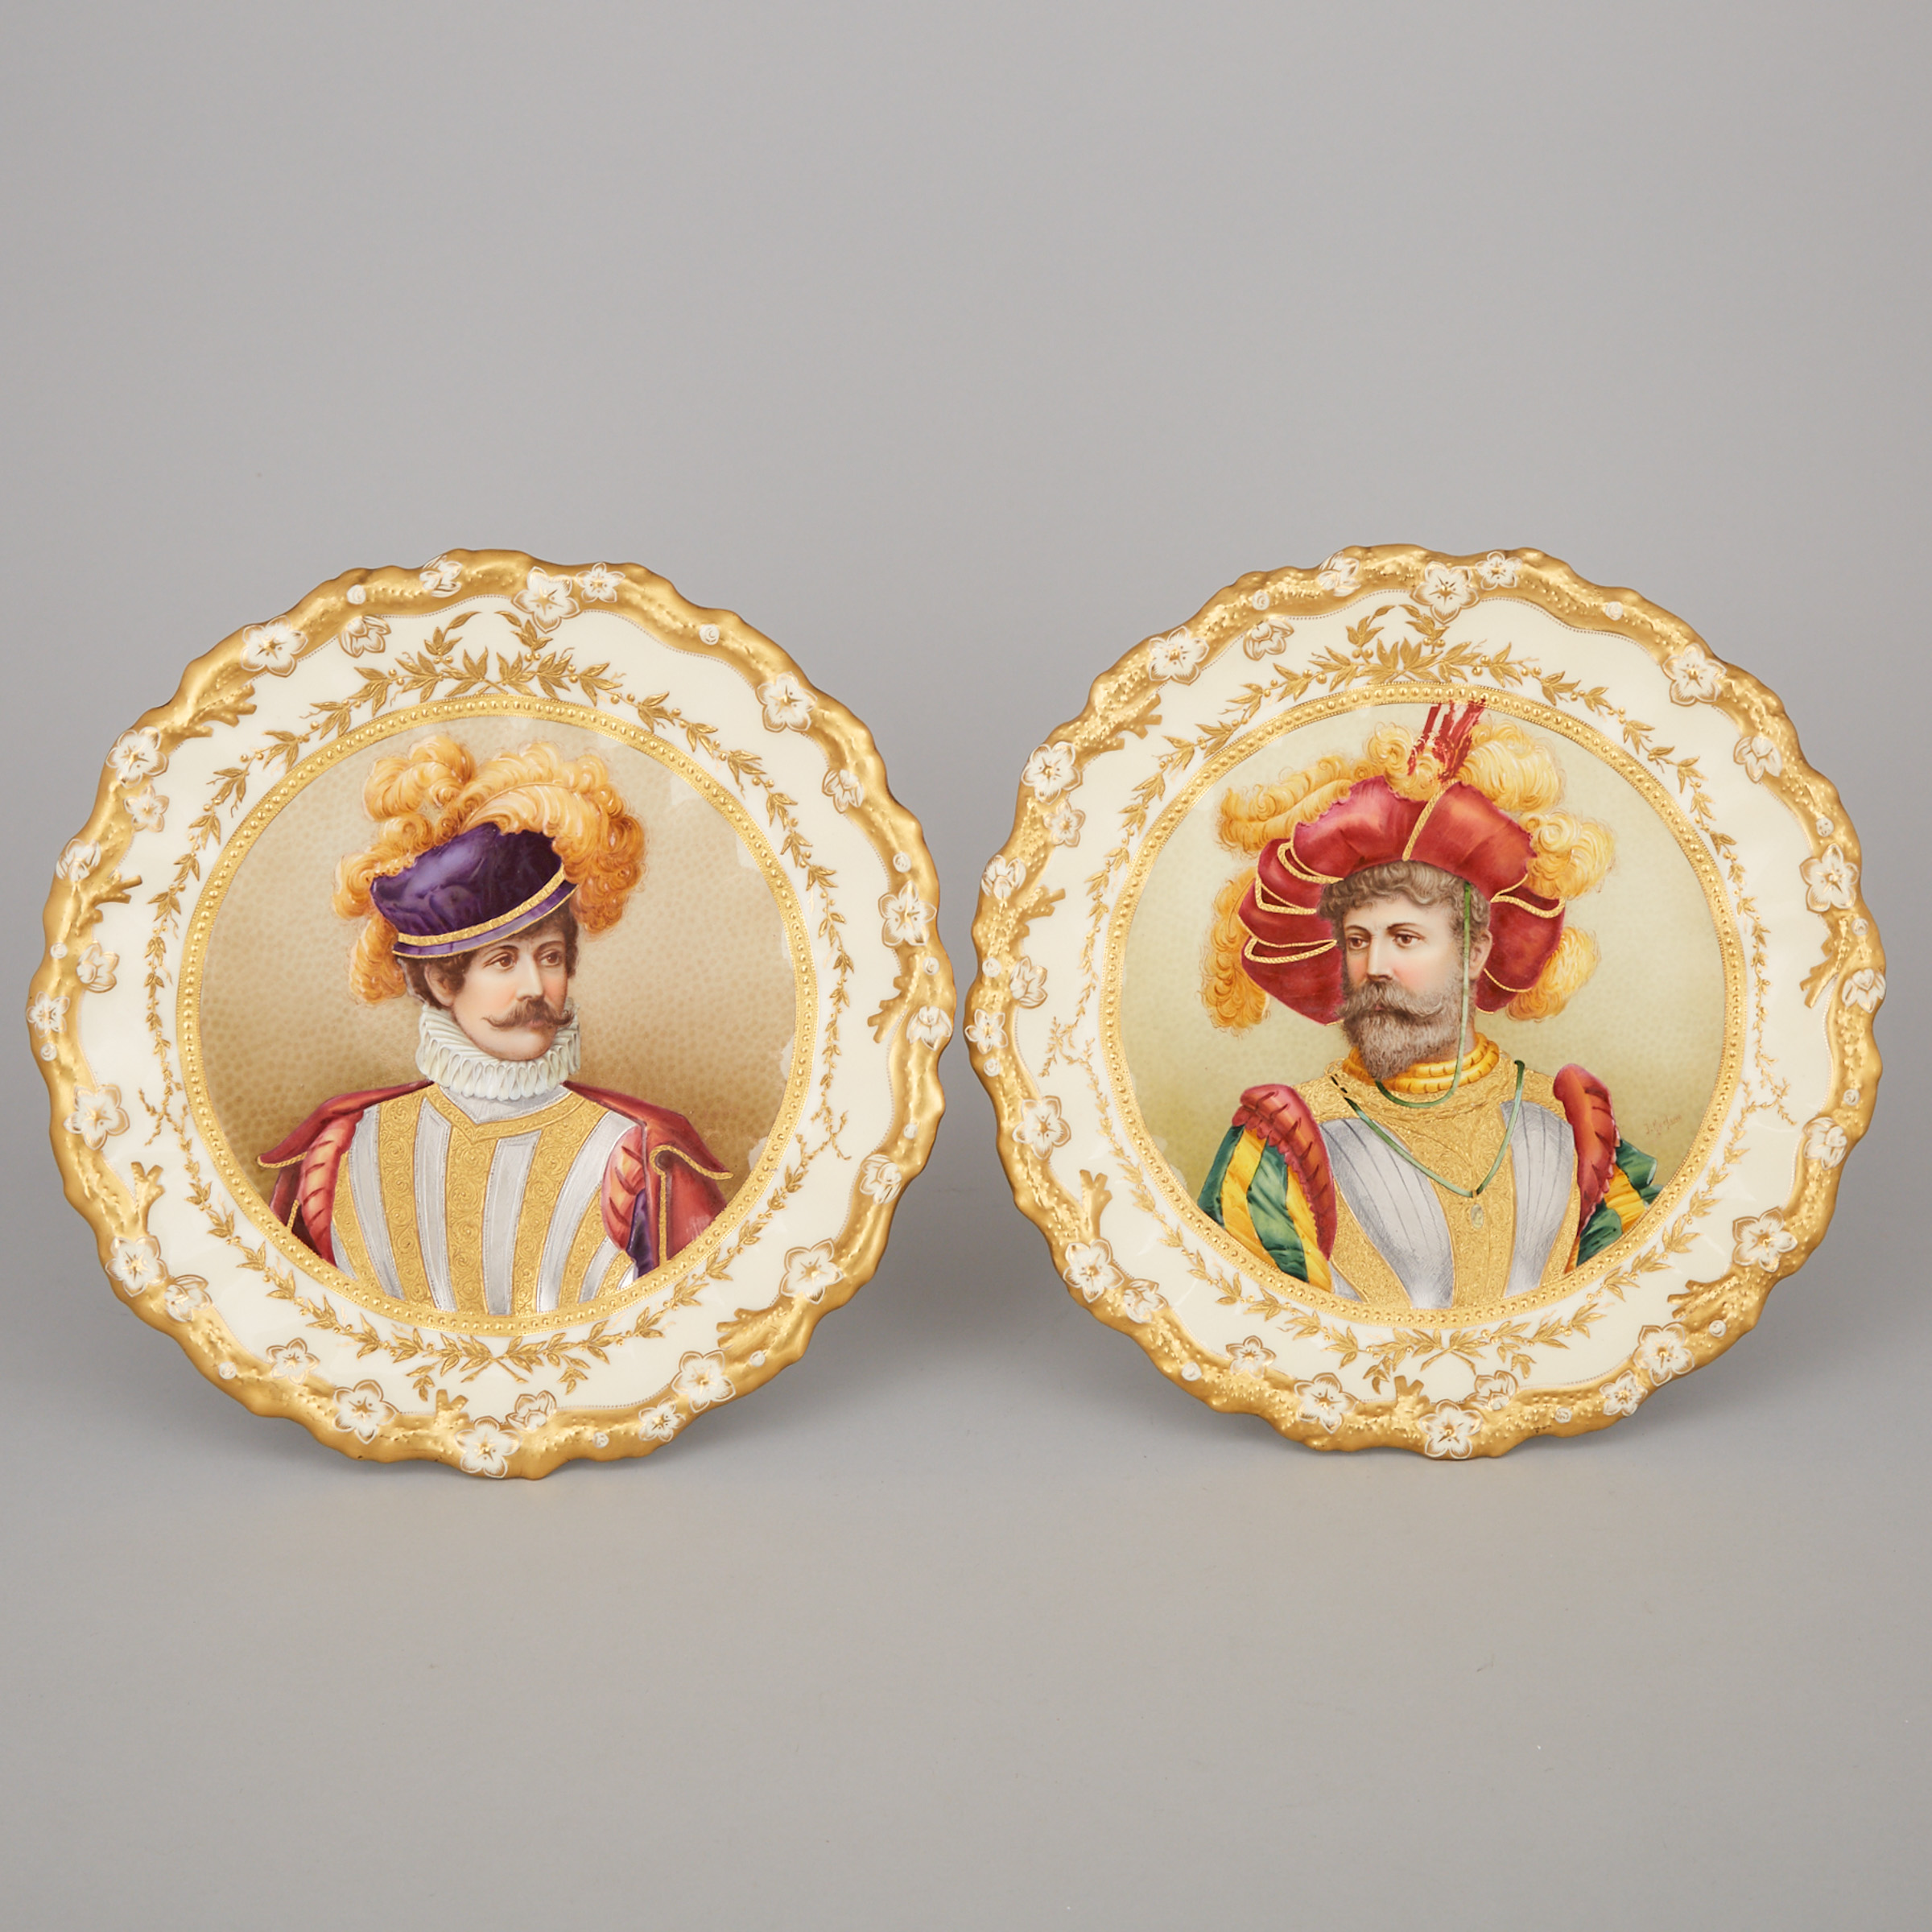 Pair of Coalport Portrait Plates of Courtiers of Henry VIII and Queen Elizabeth, Tom Keeling, early 20th century